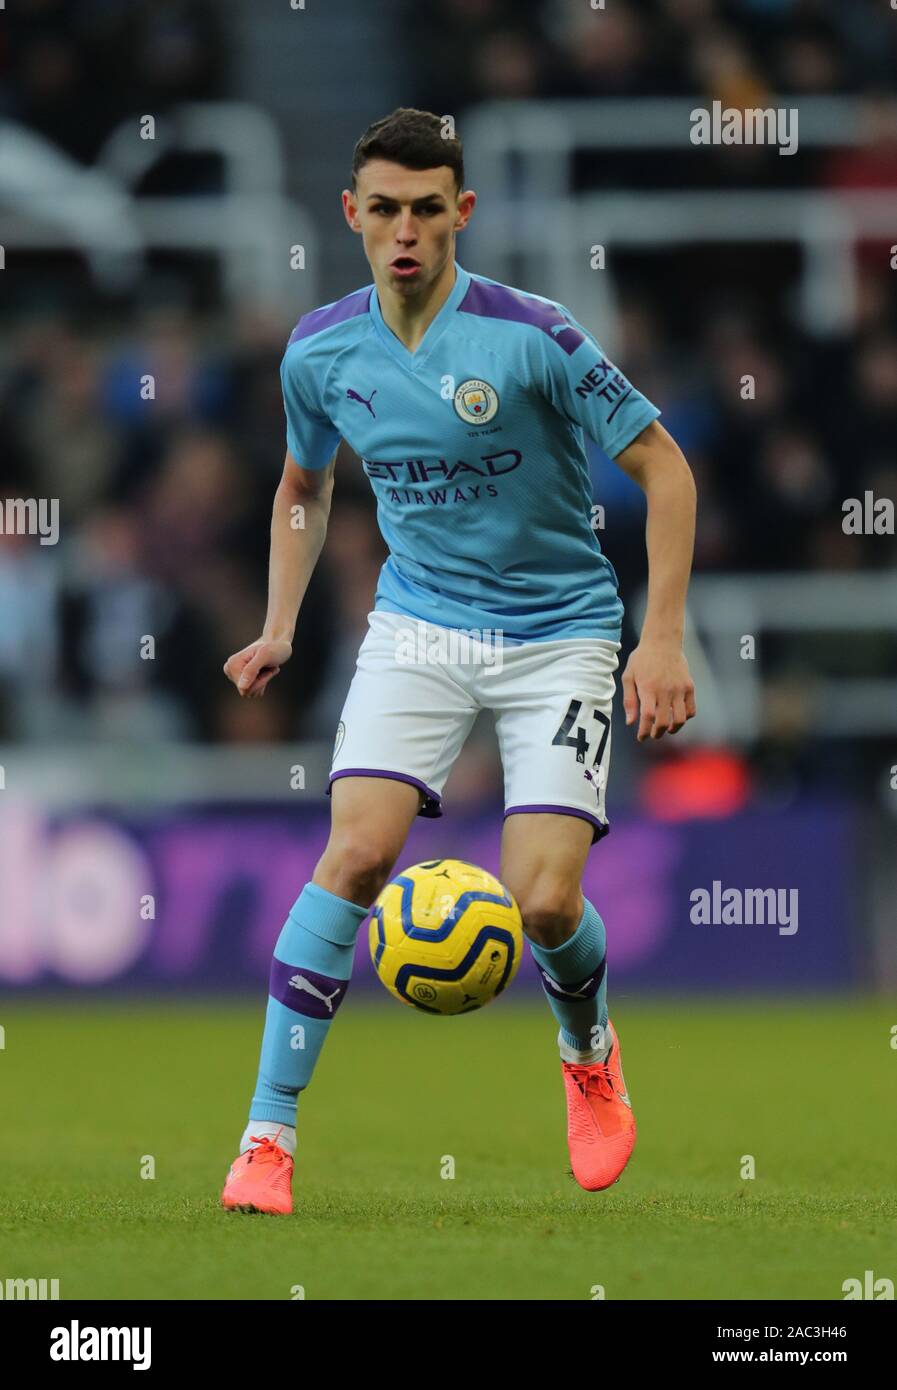 PHIL FODEN, MANCHESTER CITY FC, 2019 Stock Photo